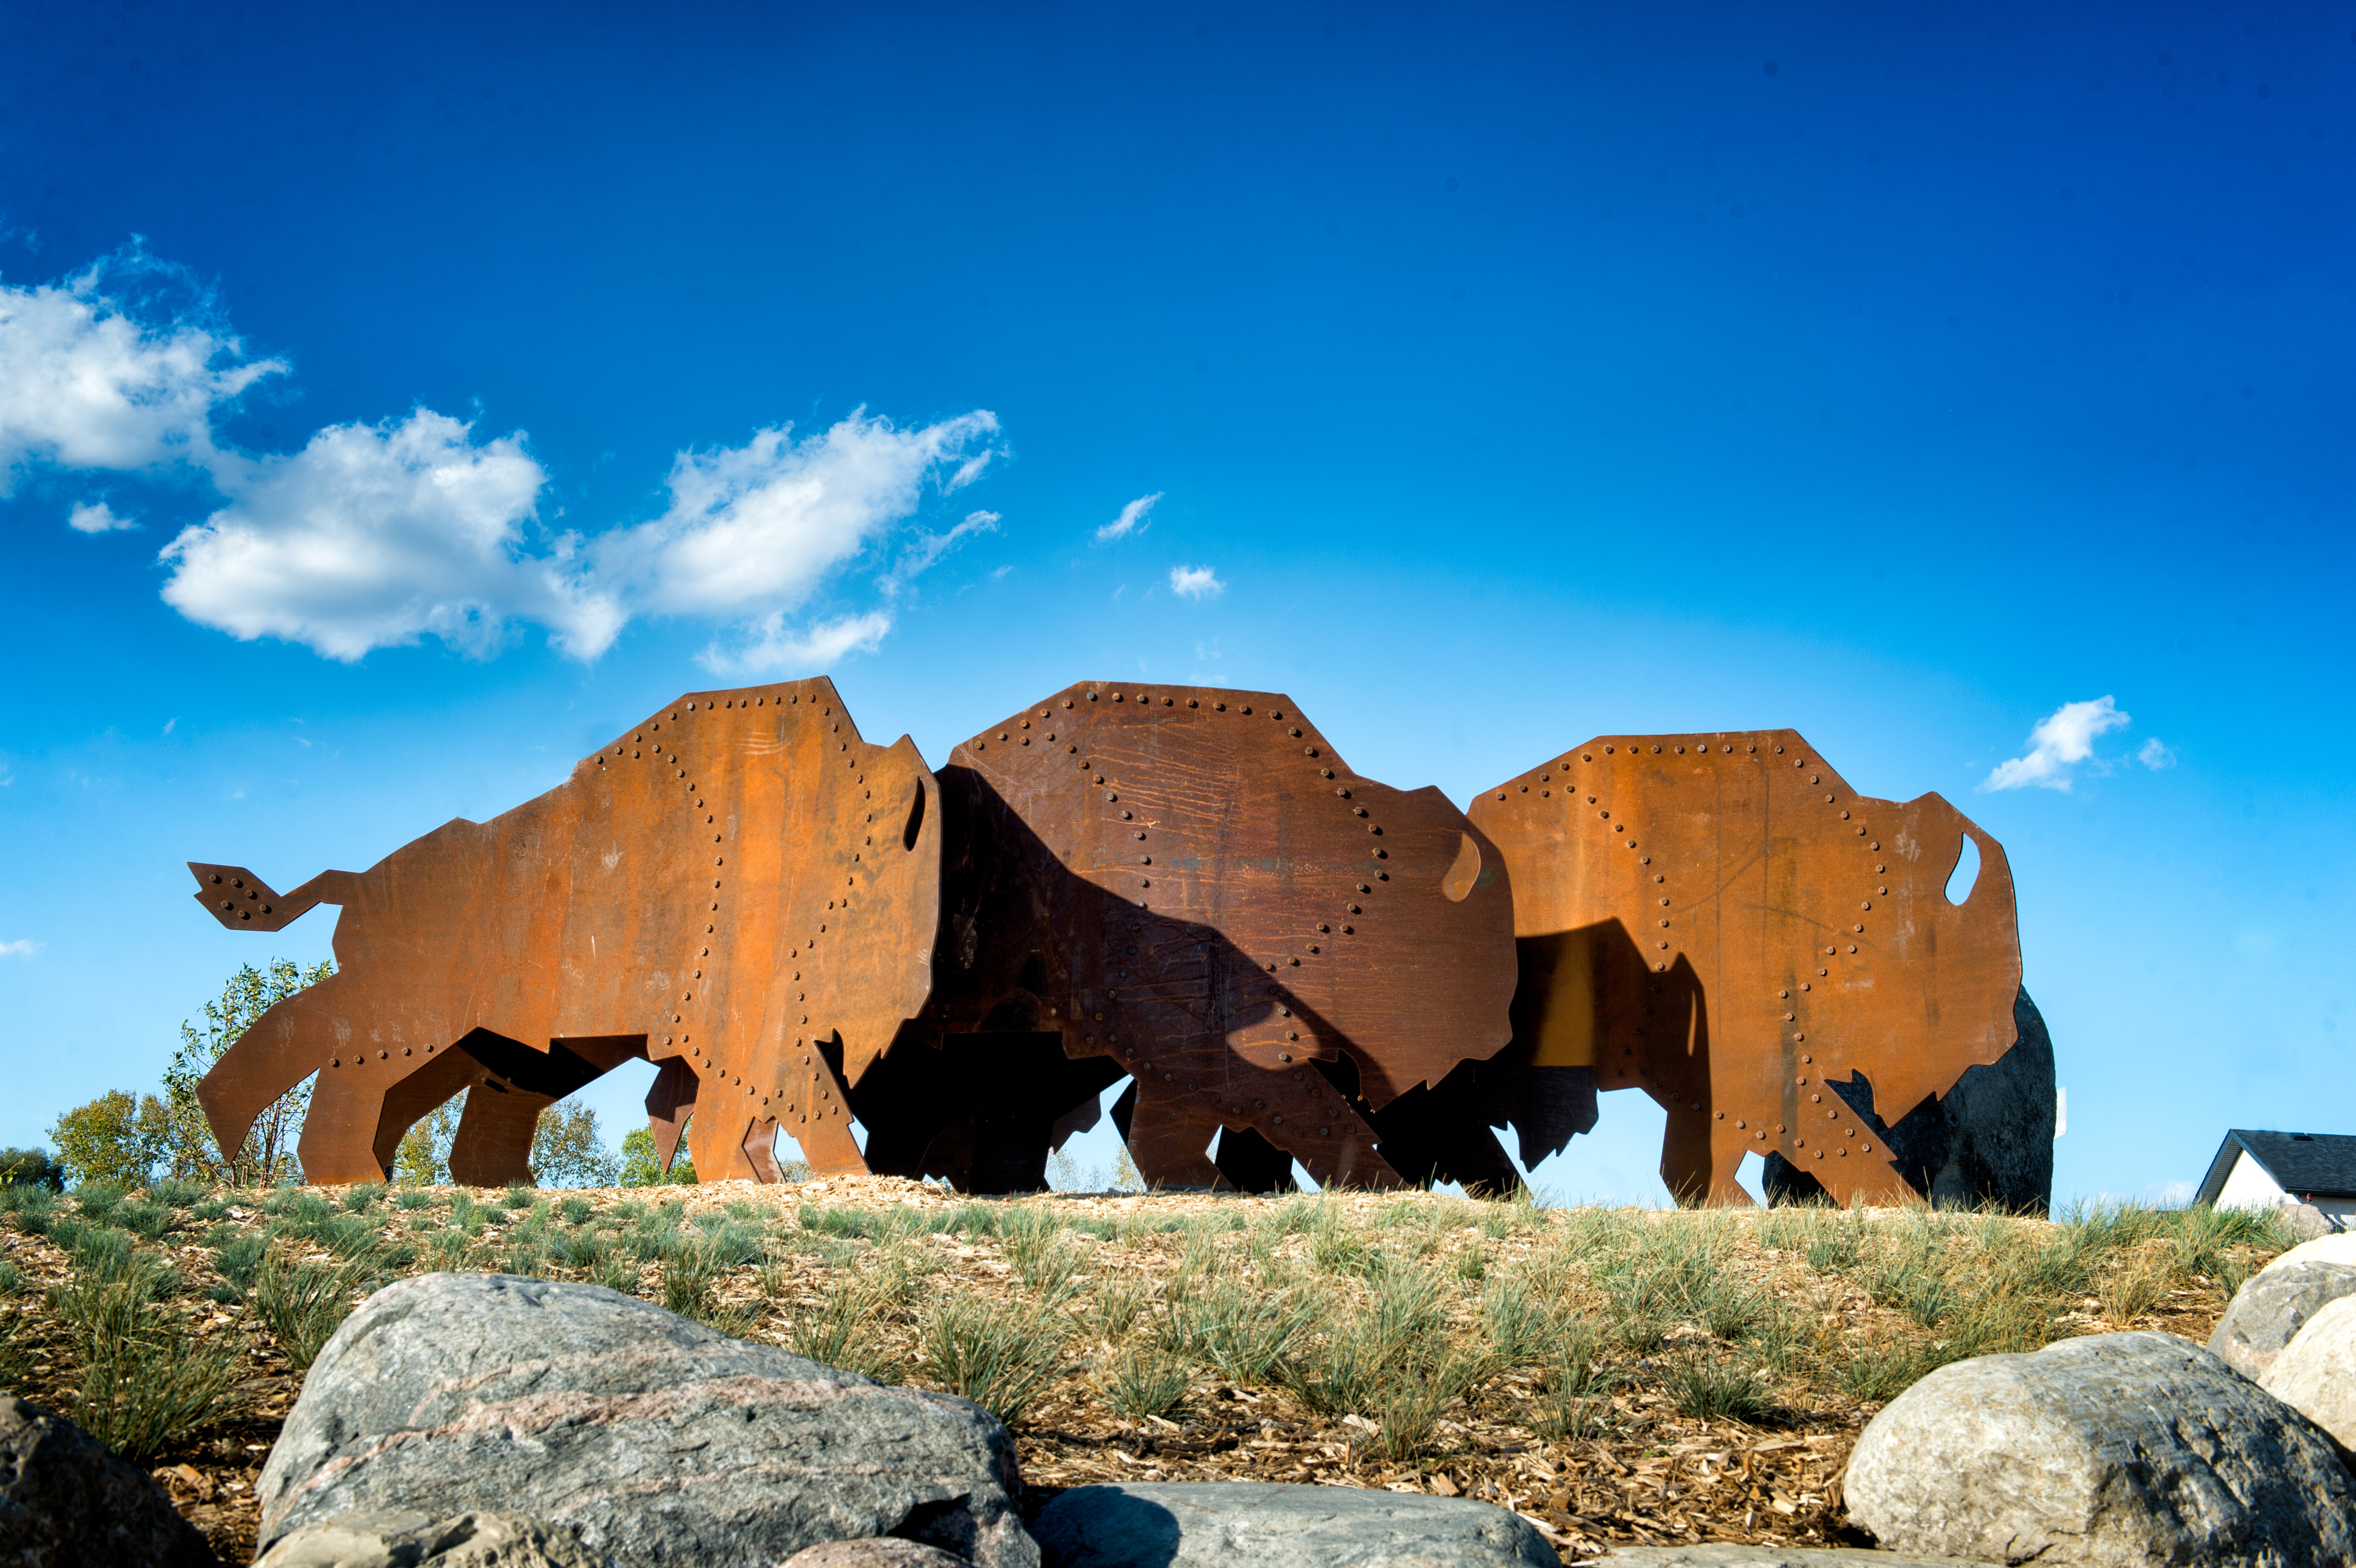 Running Bison and the Rubbing Stone - by David MacNair